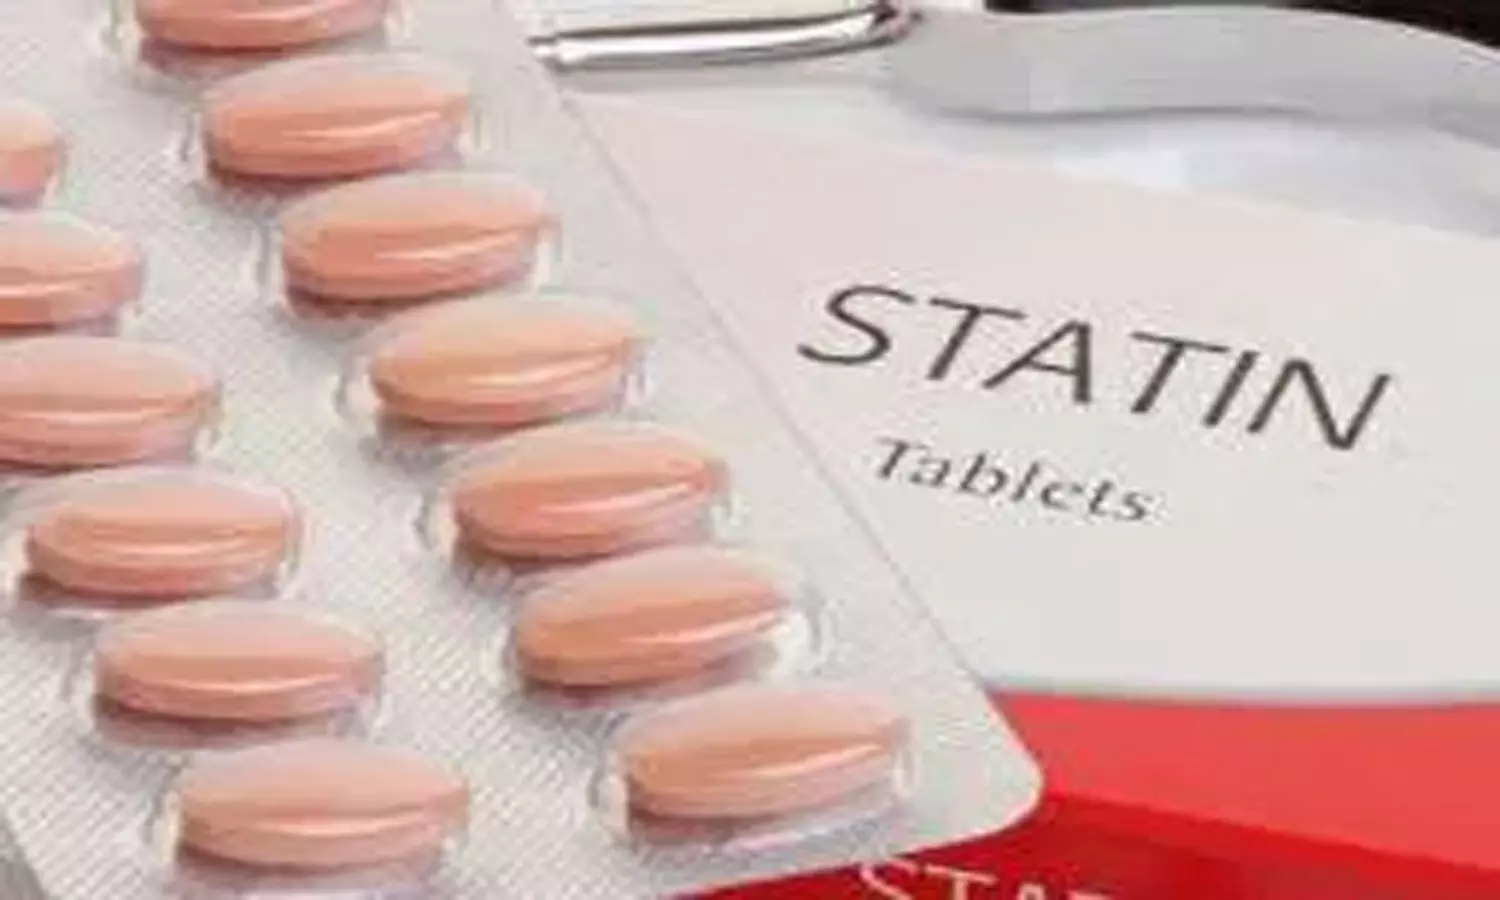 Statins may help prevent   chemotherapy induced heart failure,finds study